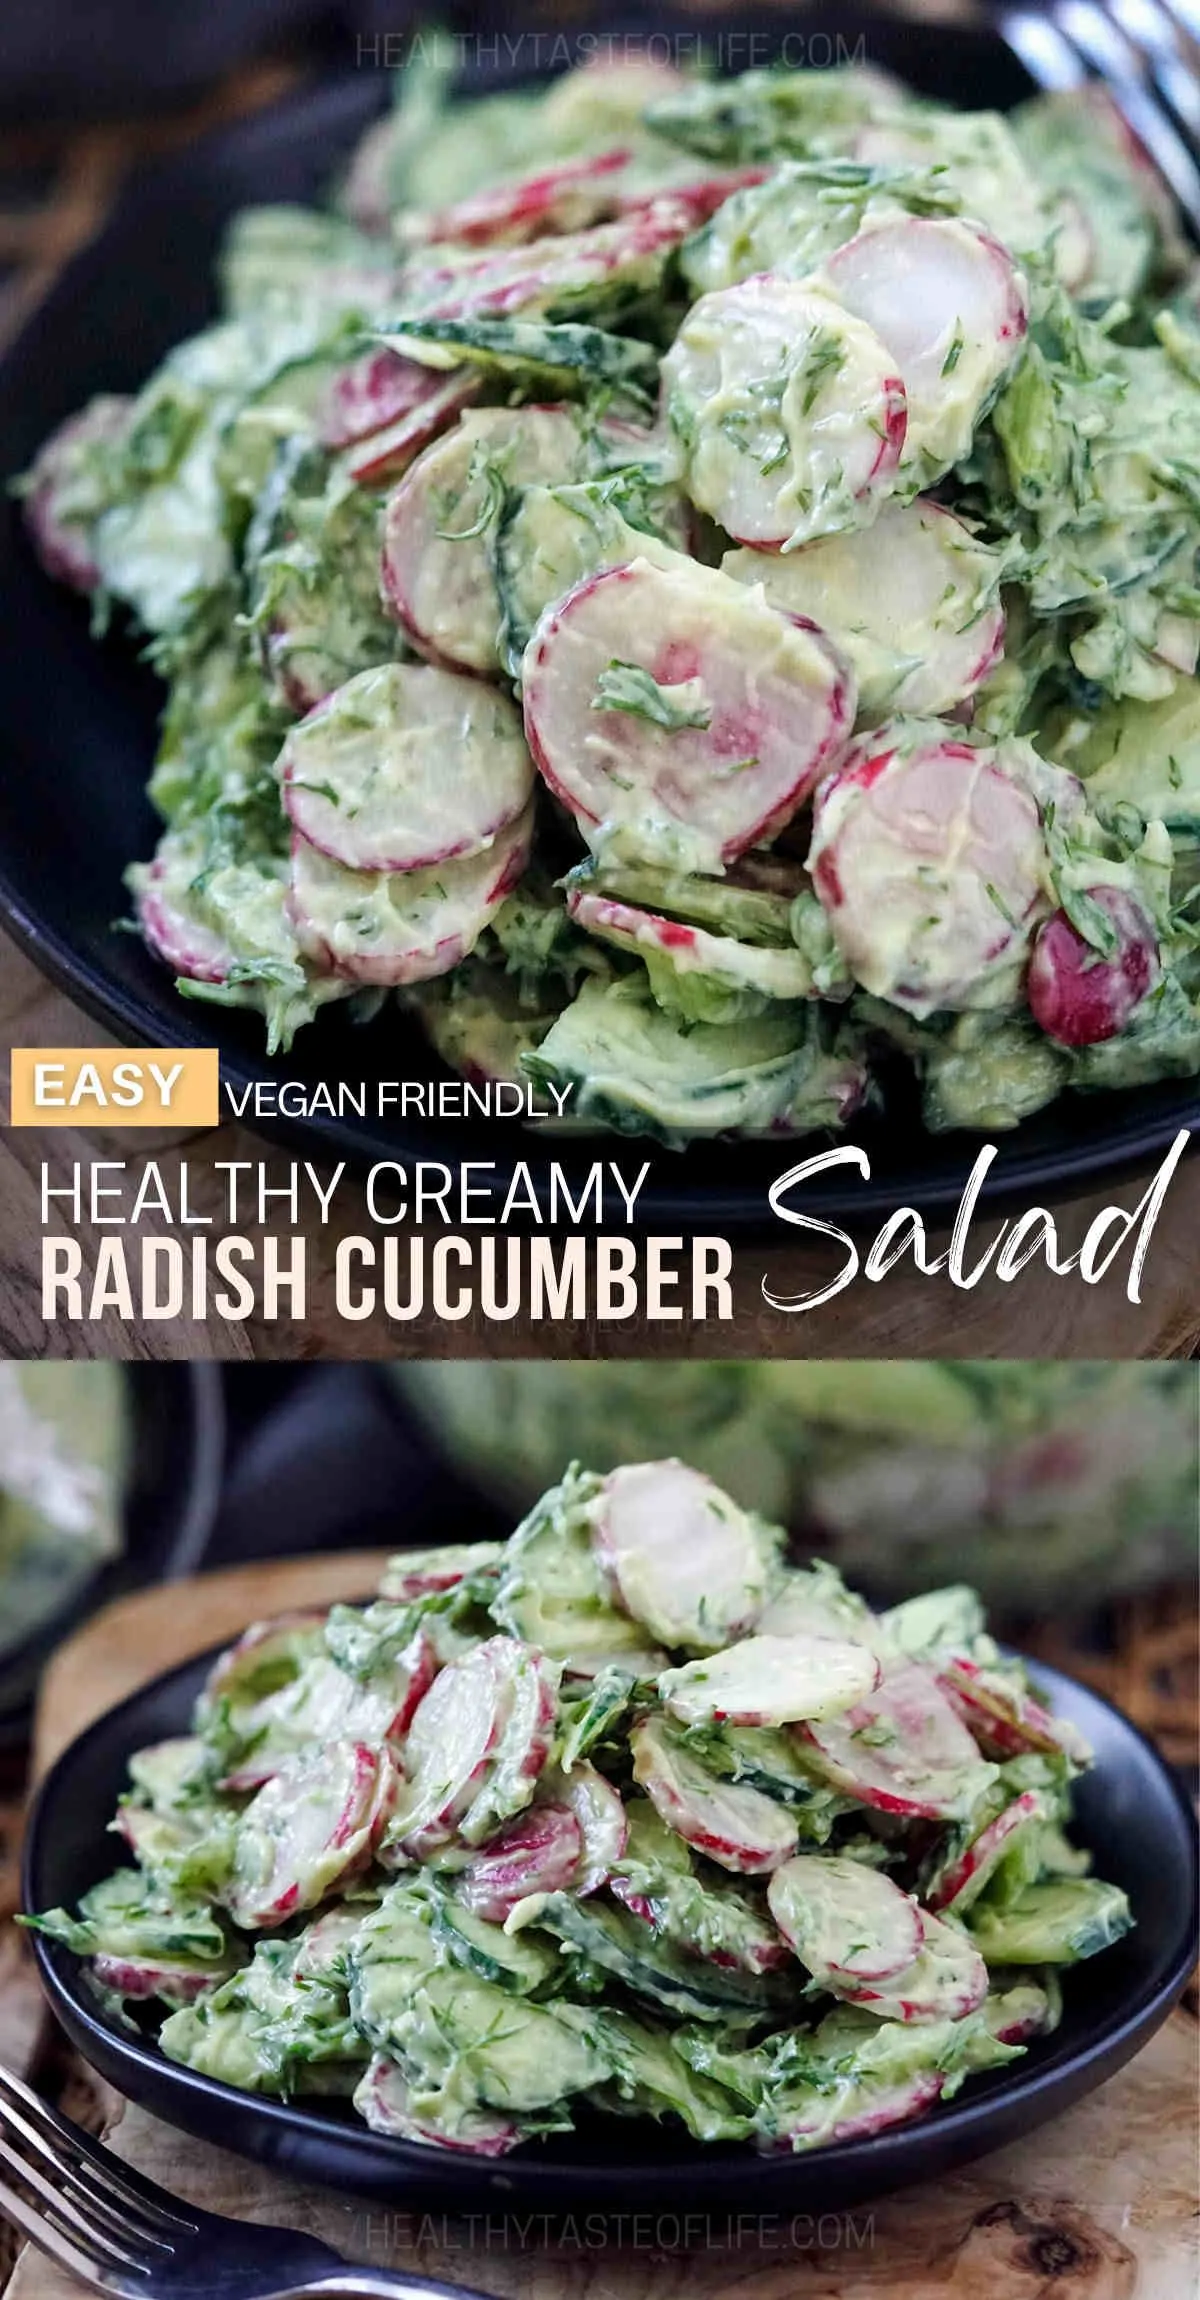 This healthy radish cucumber salad is loaded with crunchy red radishes and crispy cucumbers and finished with a fresh creamy salad dressing with dill and tangy notes. Serve this simple healthful salad with cucumber and radish chilled as a refreshing veggie side dish during spring or summer. #radish #cucumber #salad #dill #summer #spring #radishcucumbersalad